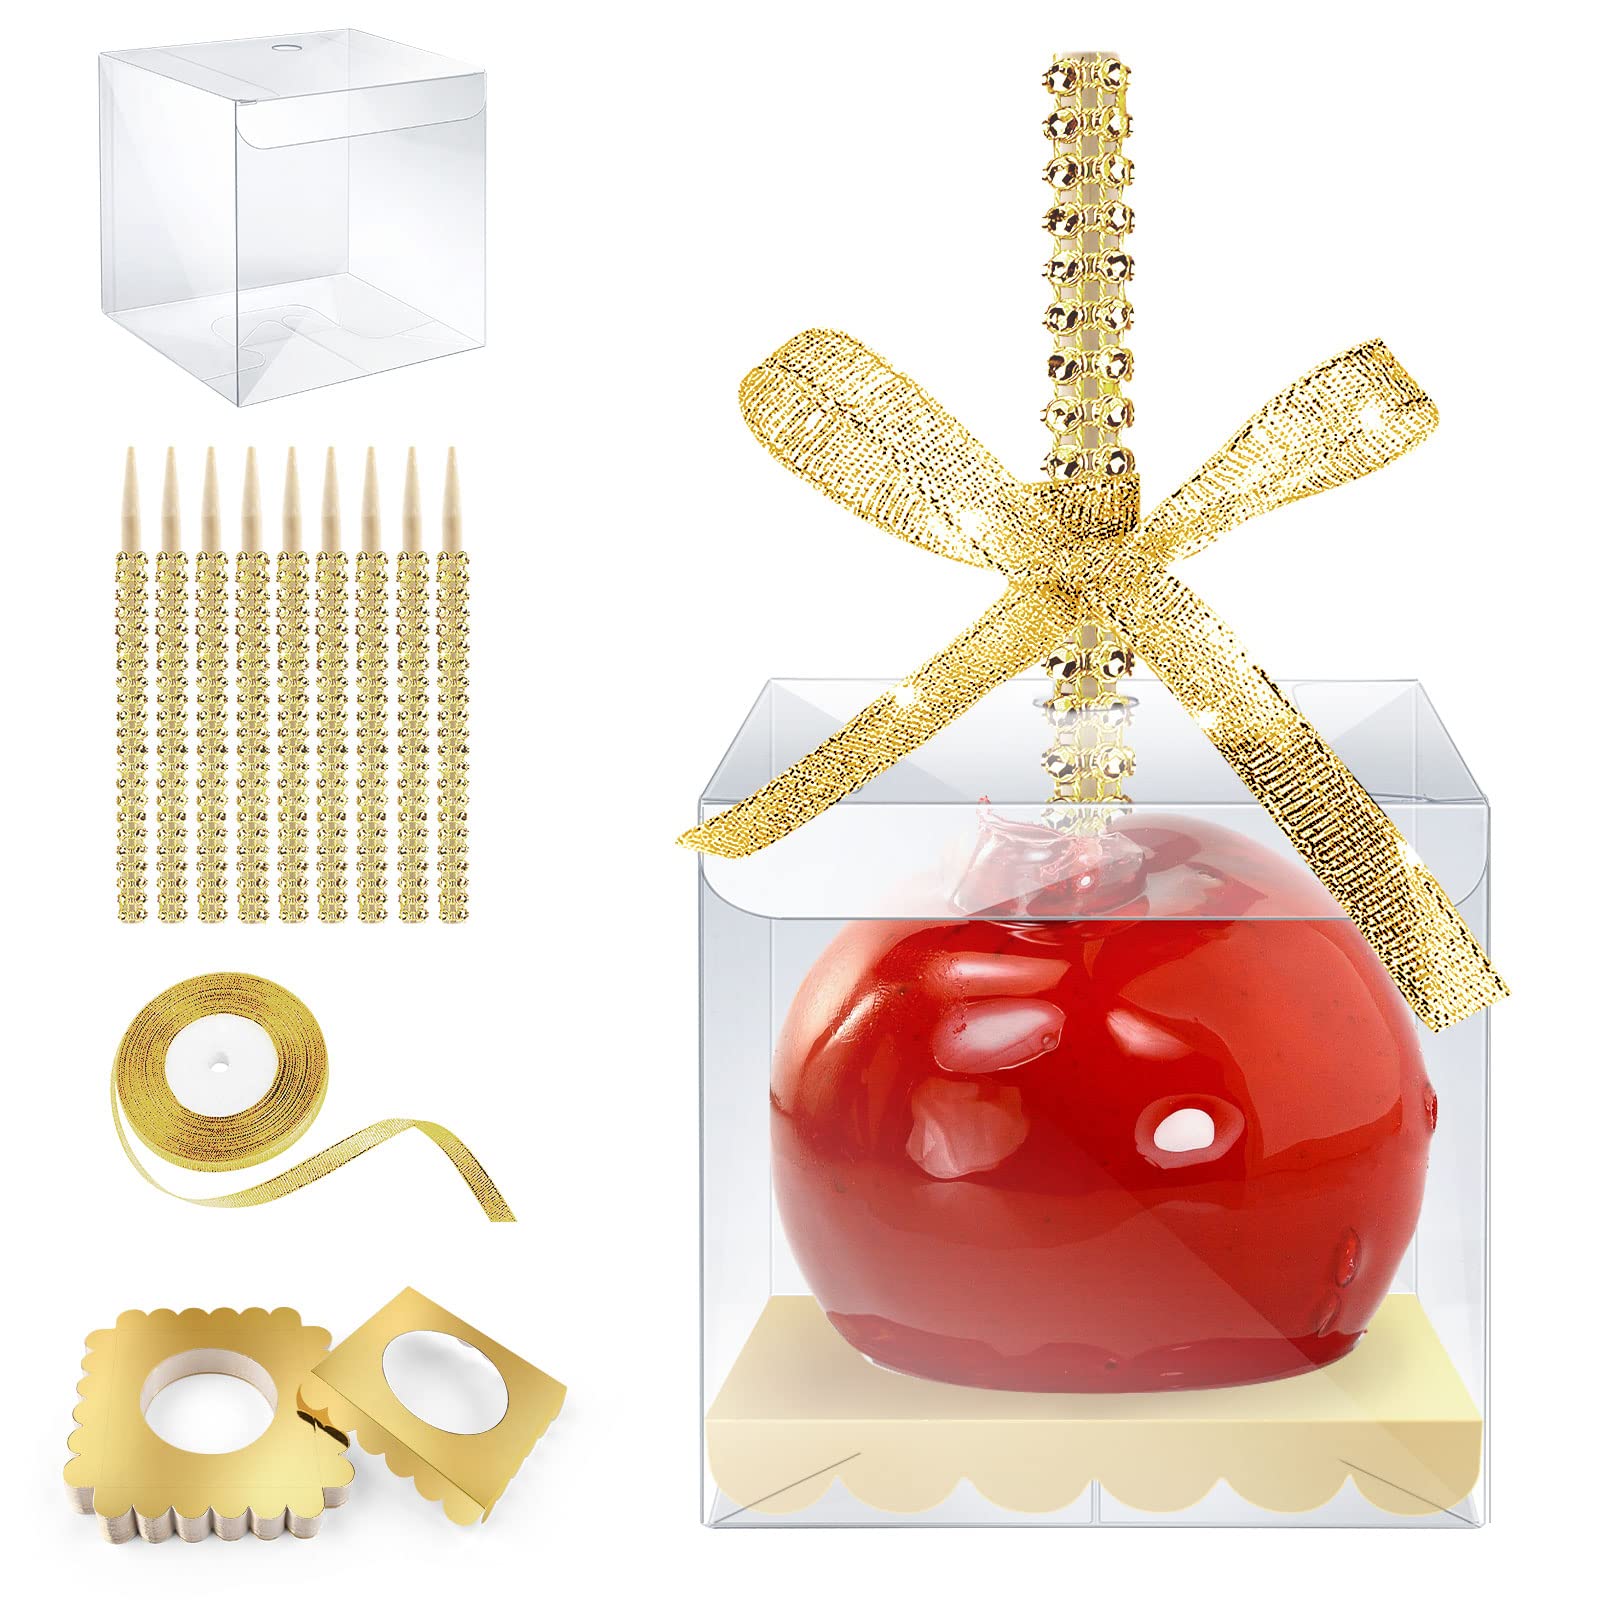 Candy Apple Boxes with Bling Stick Hole Set & 50 PCS Candy Apple Box Base,20 Pack Caramel Apple Wrapping Kit with Clear Containers & Rhinestone Bamboo Skewers &Glitter Ribbons for Wedding Party